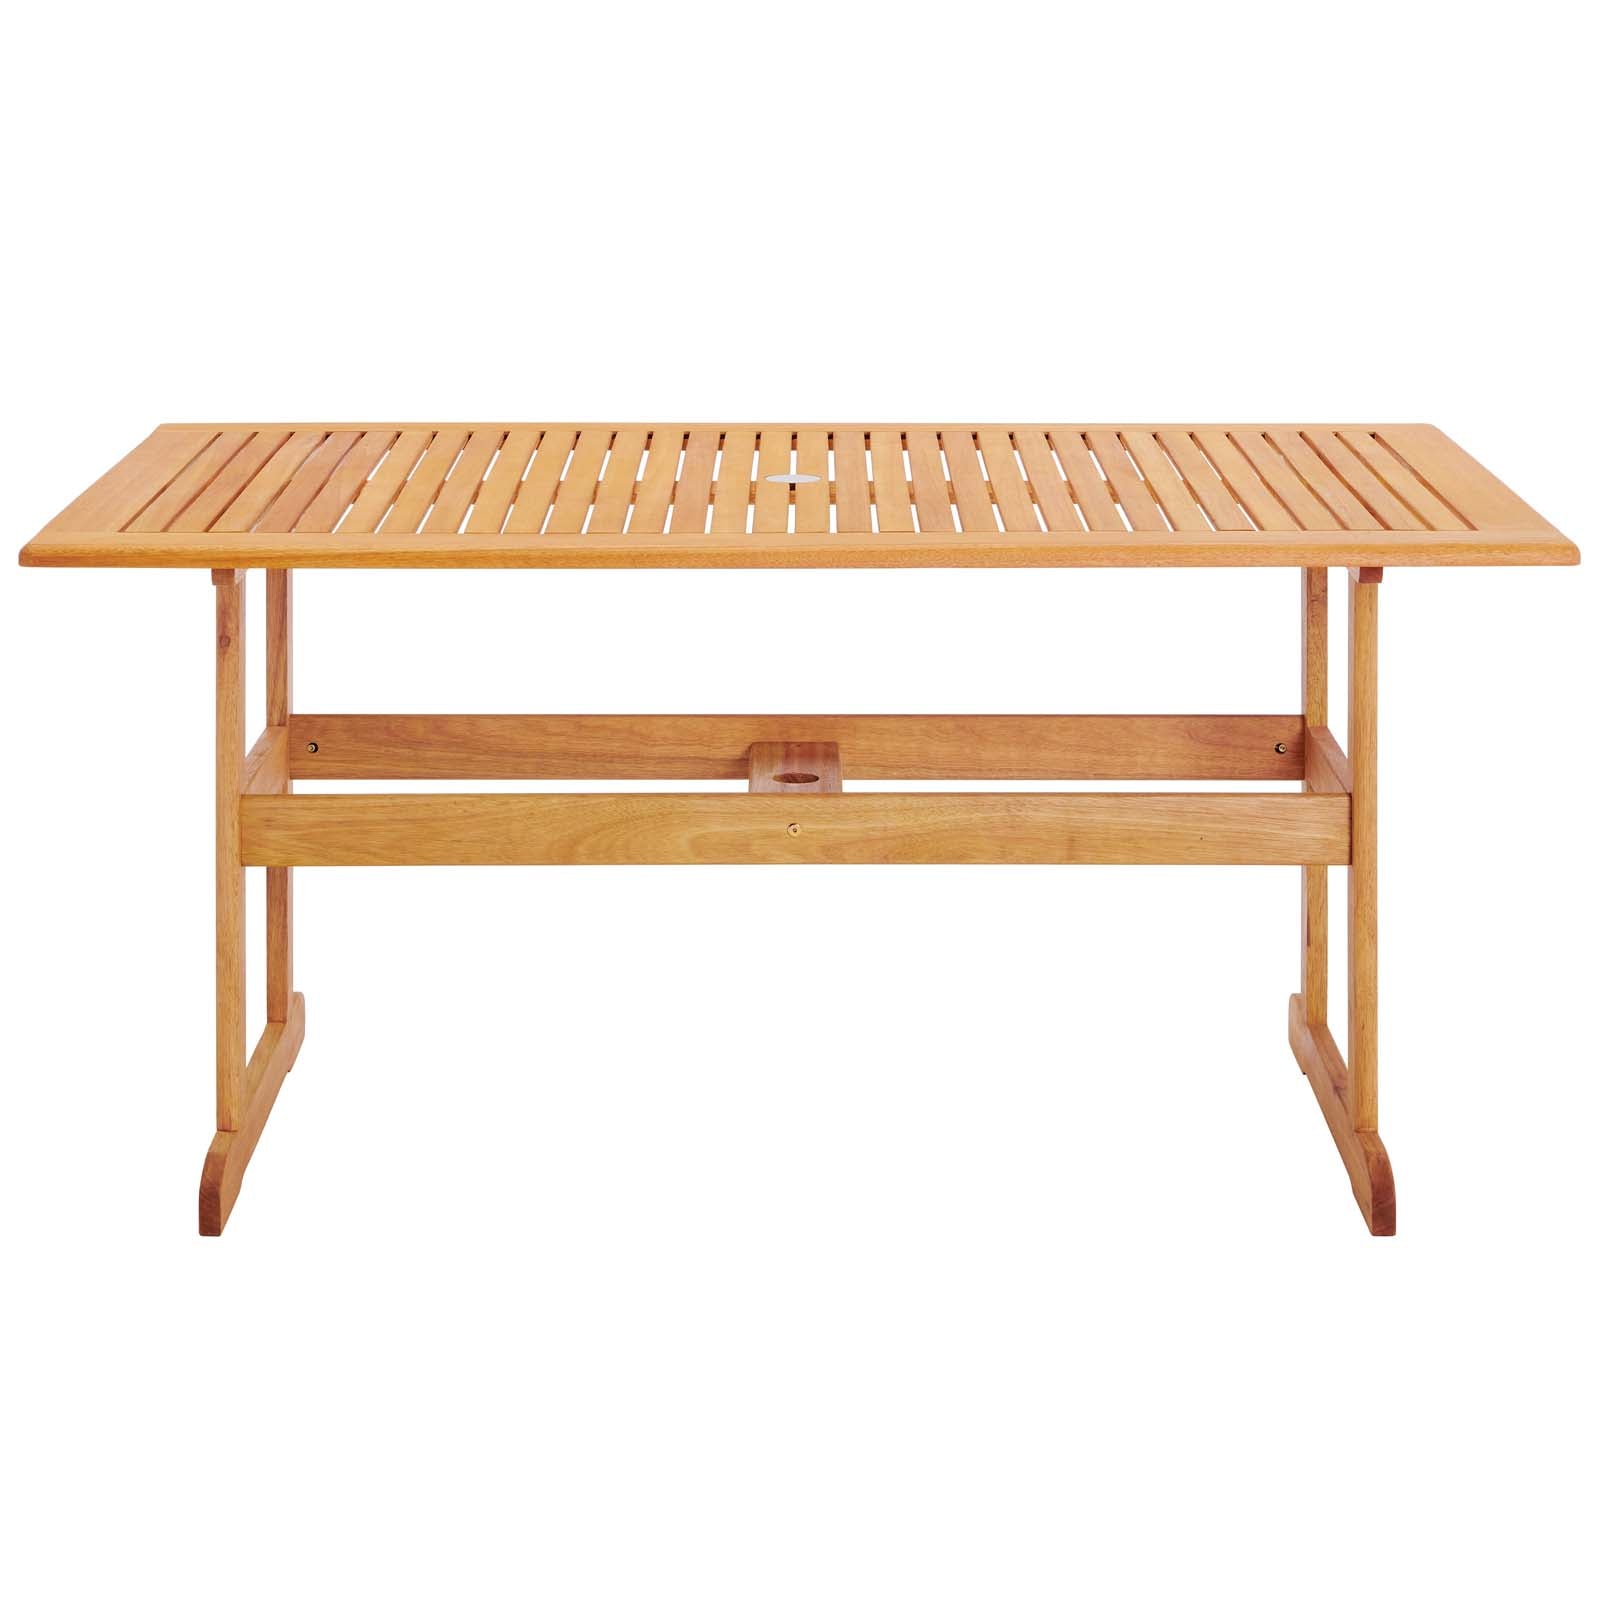 Hatteras 59" Rectangle Outdoor Patio Eucalyptus Wood Dining Table - East Shore Modern Home Furnishings